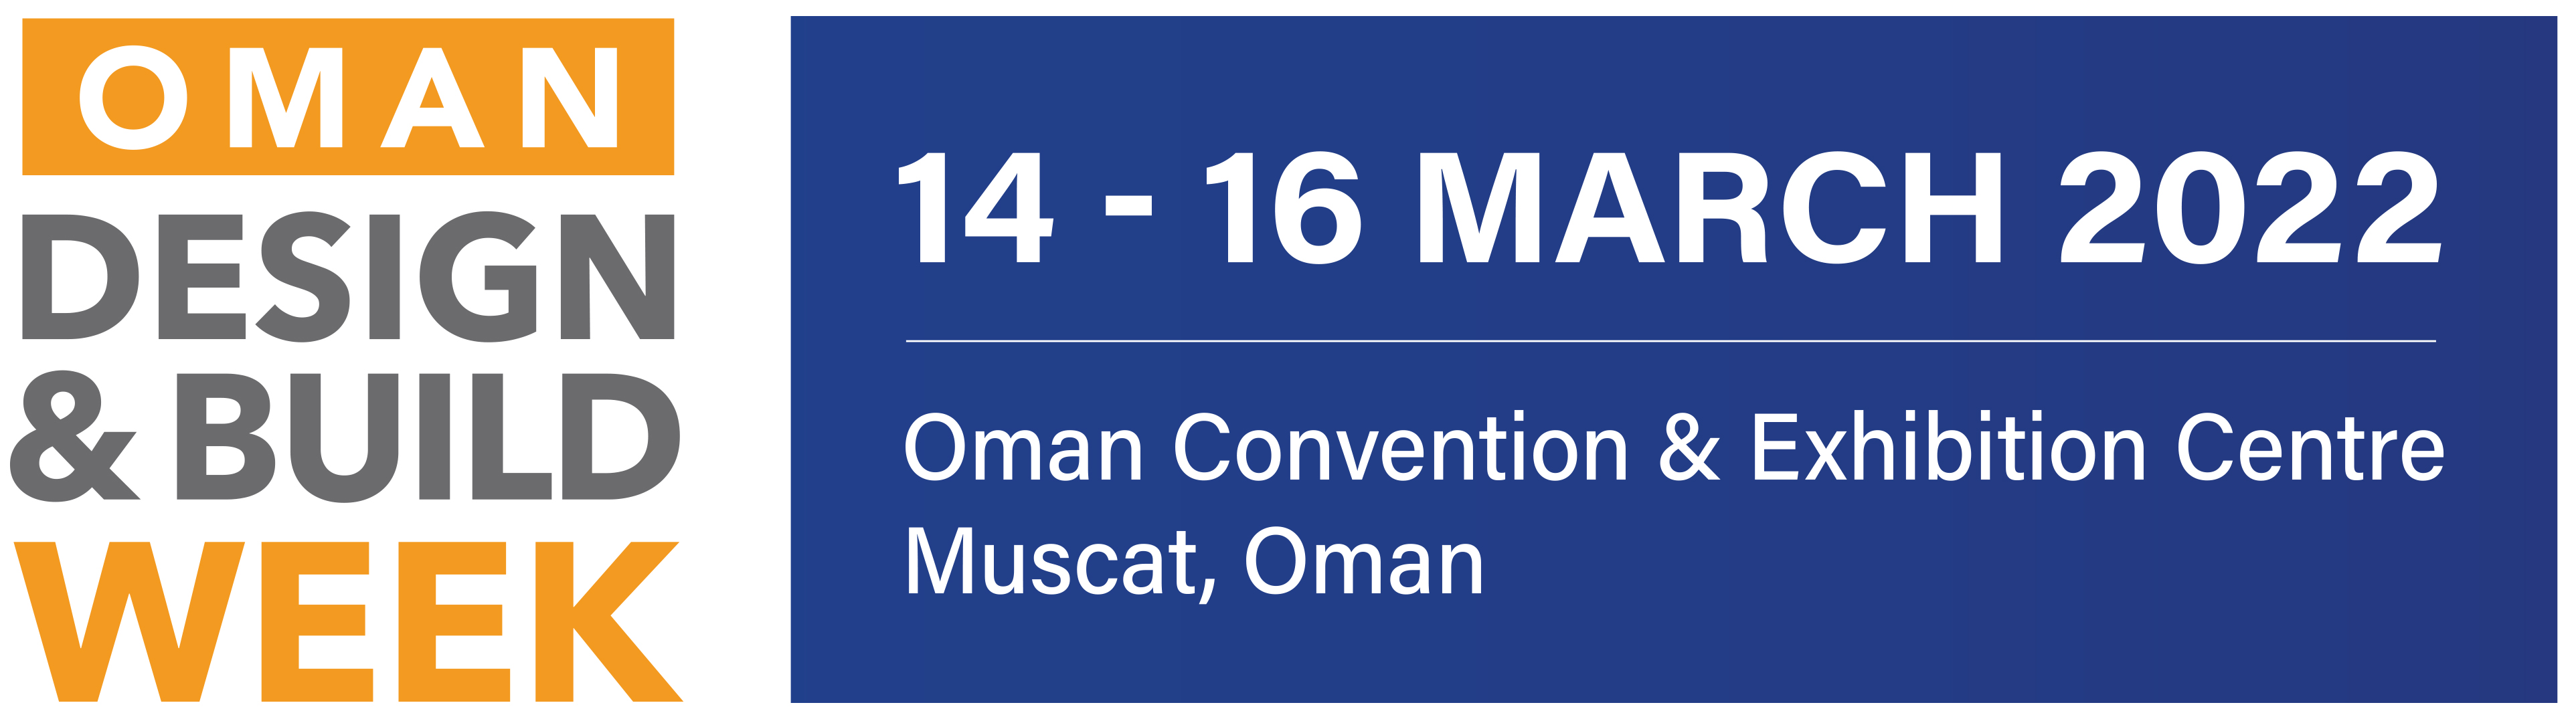 Oman Design and Build Week returns from 14 to 16 March 2022 at Oman Convention & Exhibition Centre, Oman